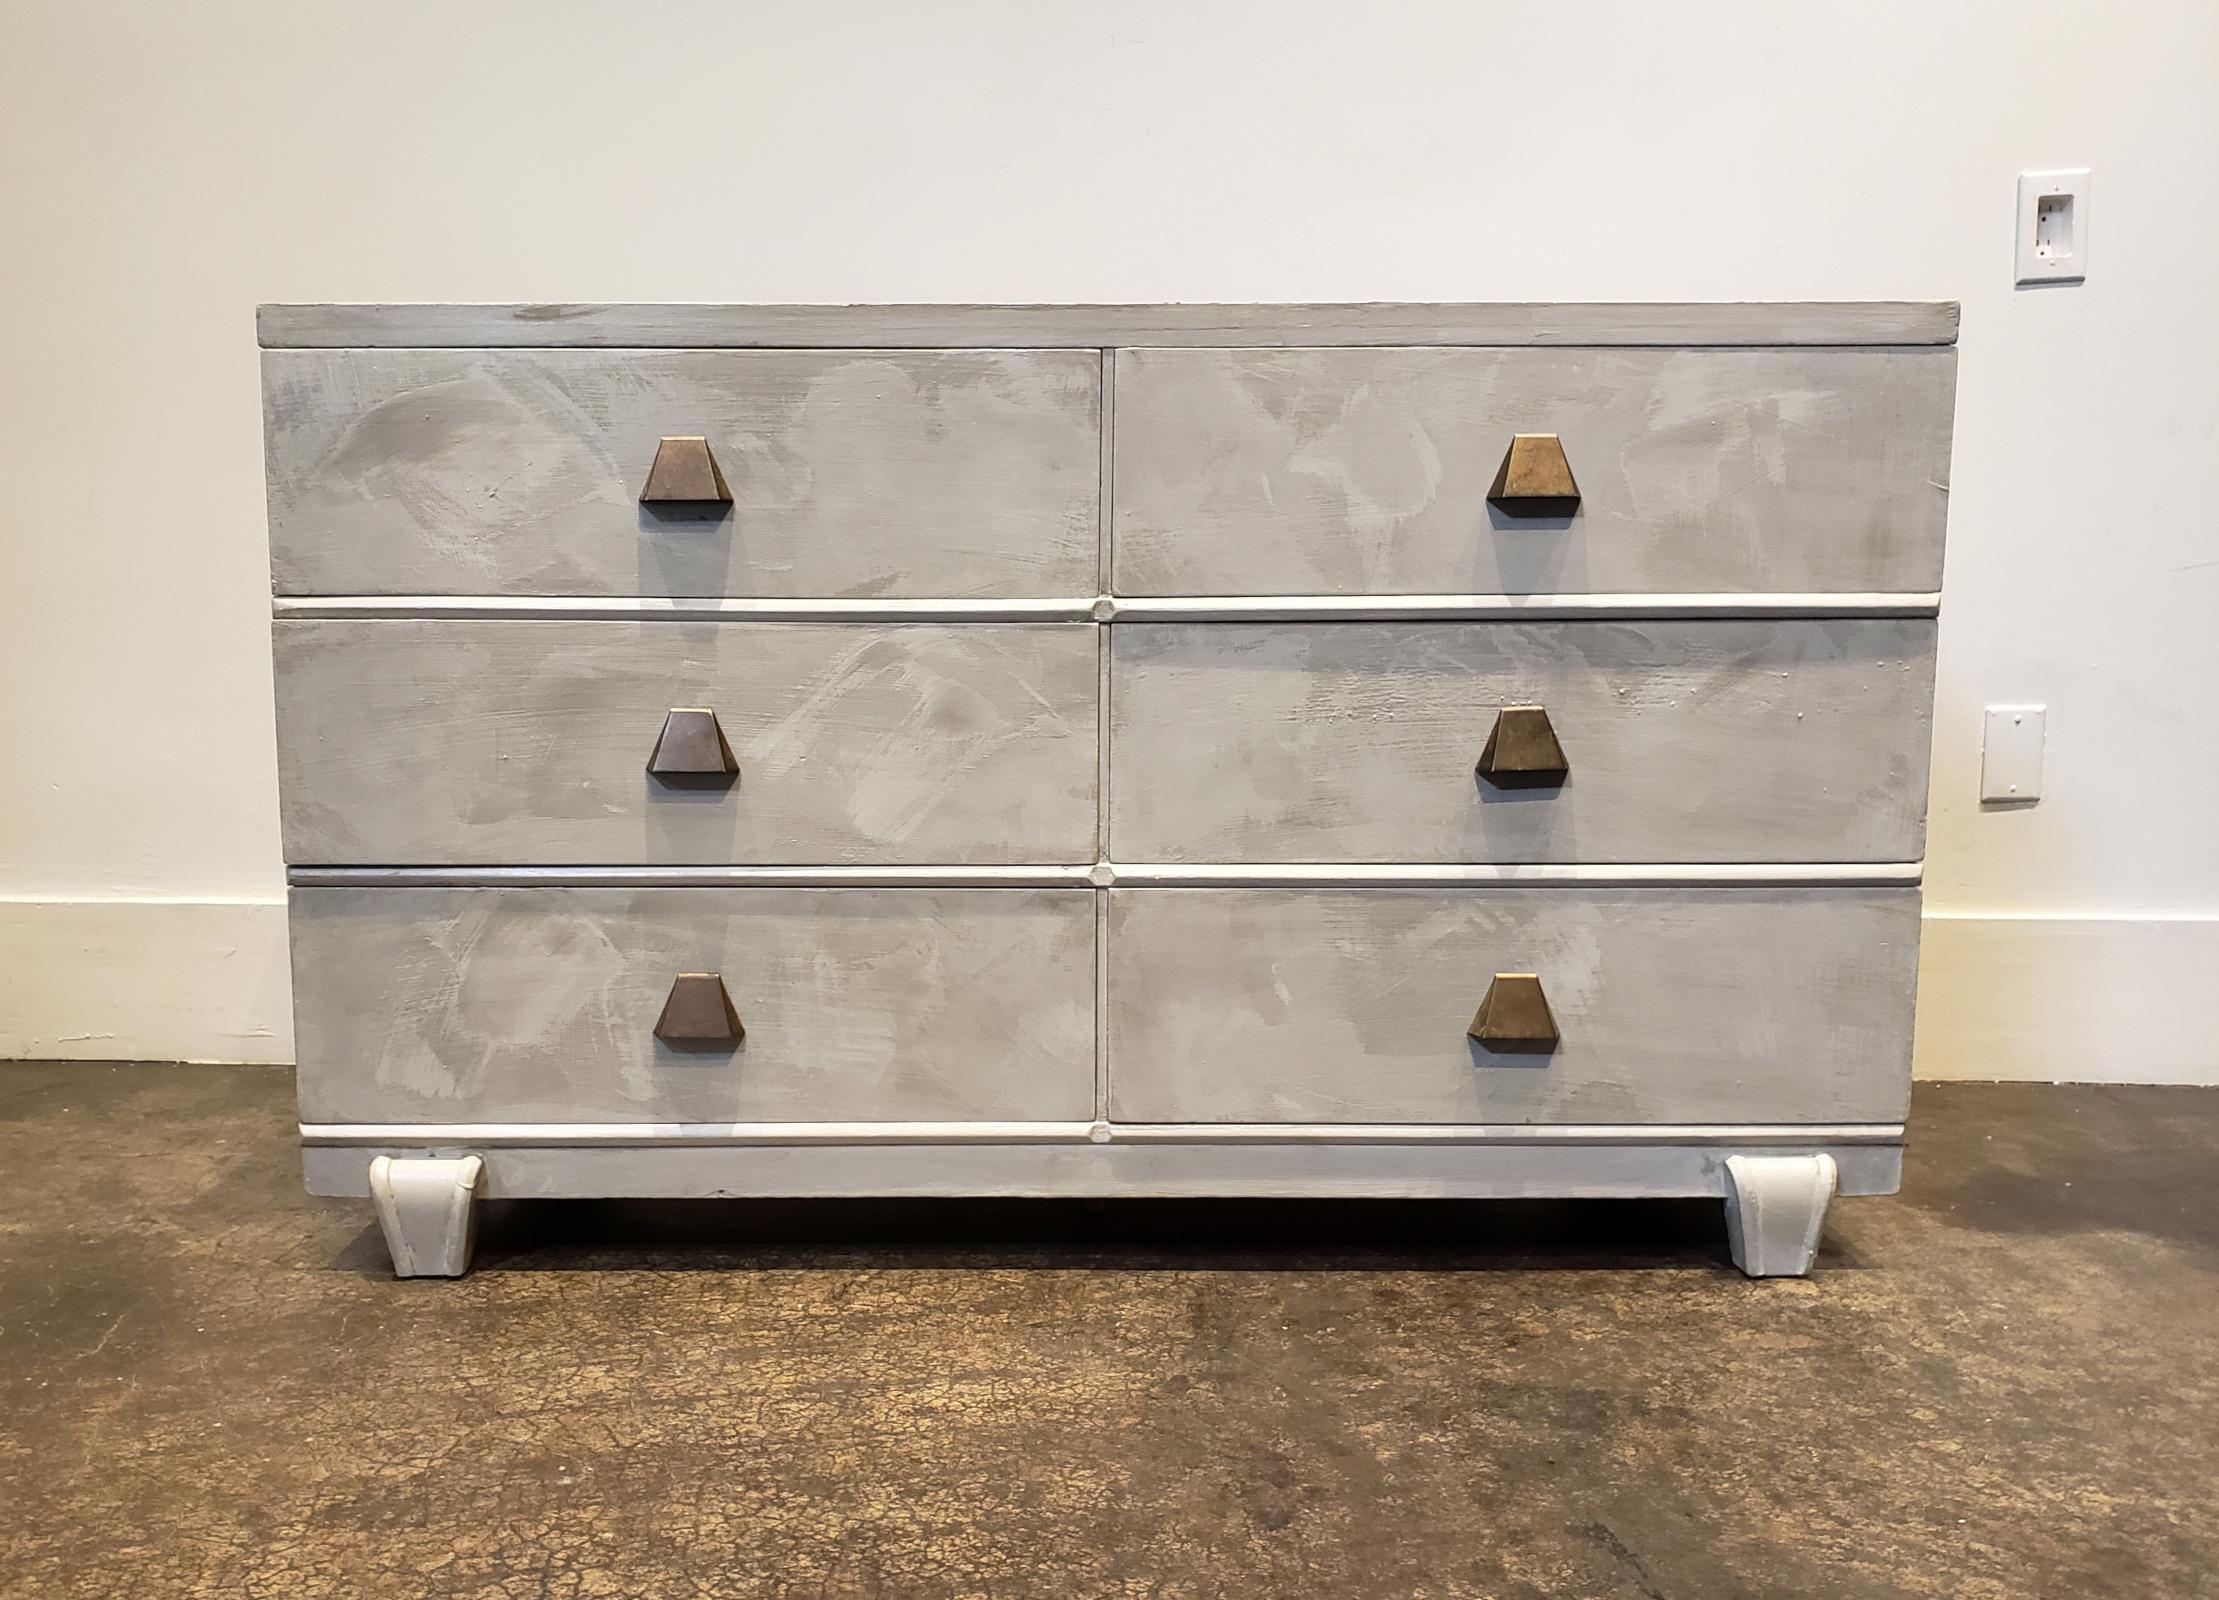 United Furniture 6-drawer dresser refinished in a faux concrete finish. Has unique trapezoidal brass pulls. Very 1980s Memphis Group. Matching nightstands are also available.